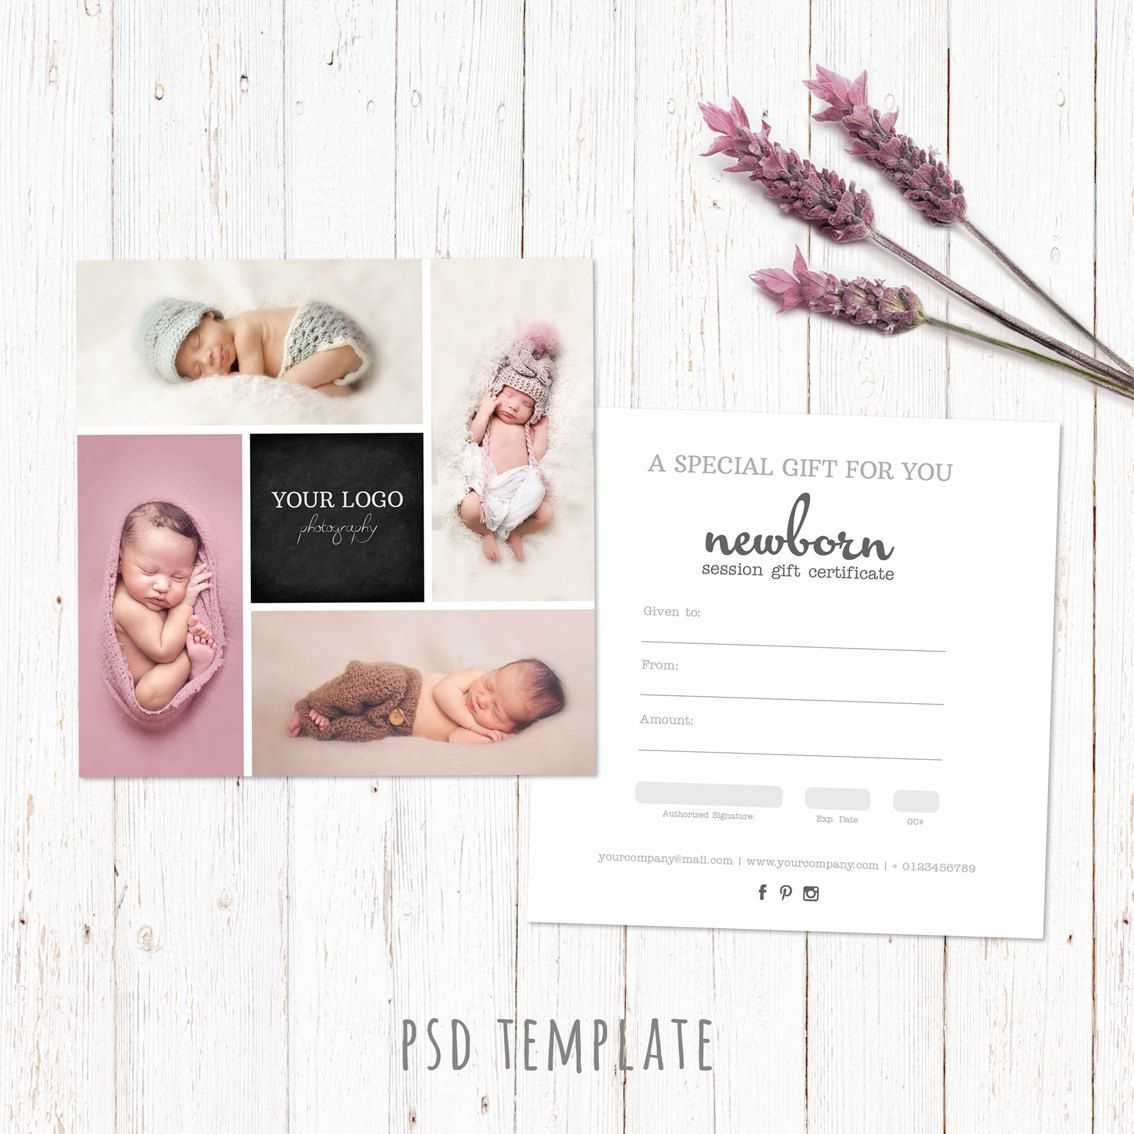 Gift Certificate Template. Newborn Session Photography Gift Pertaining To Photoshoot Gift Certificate Template